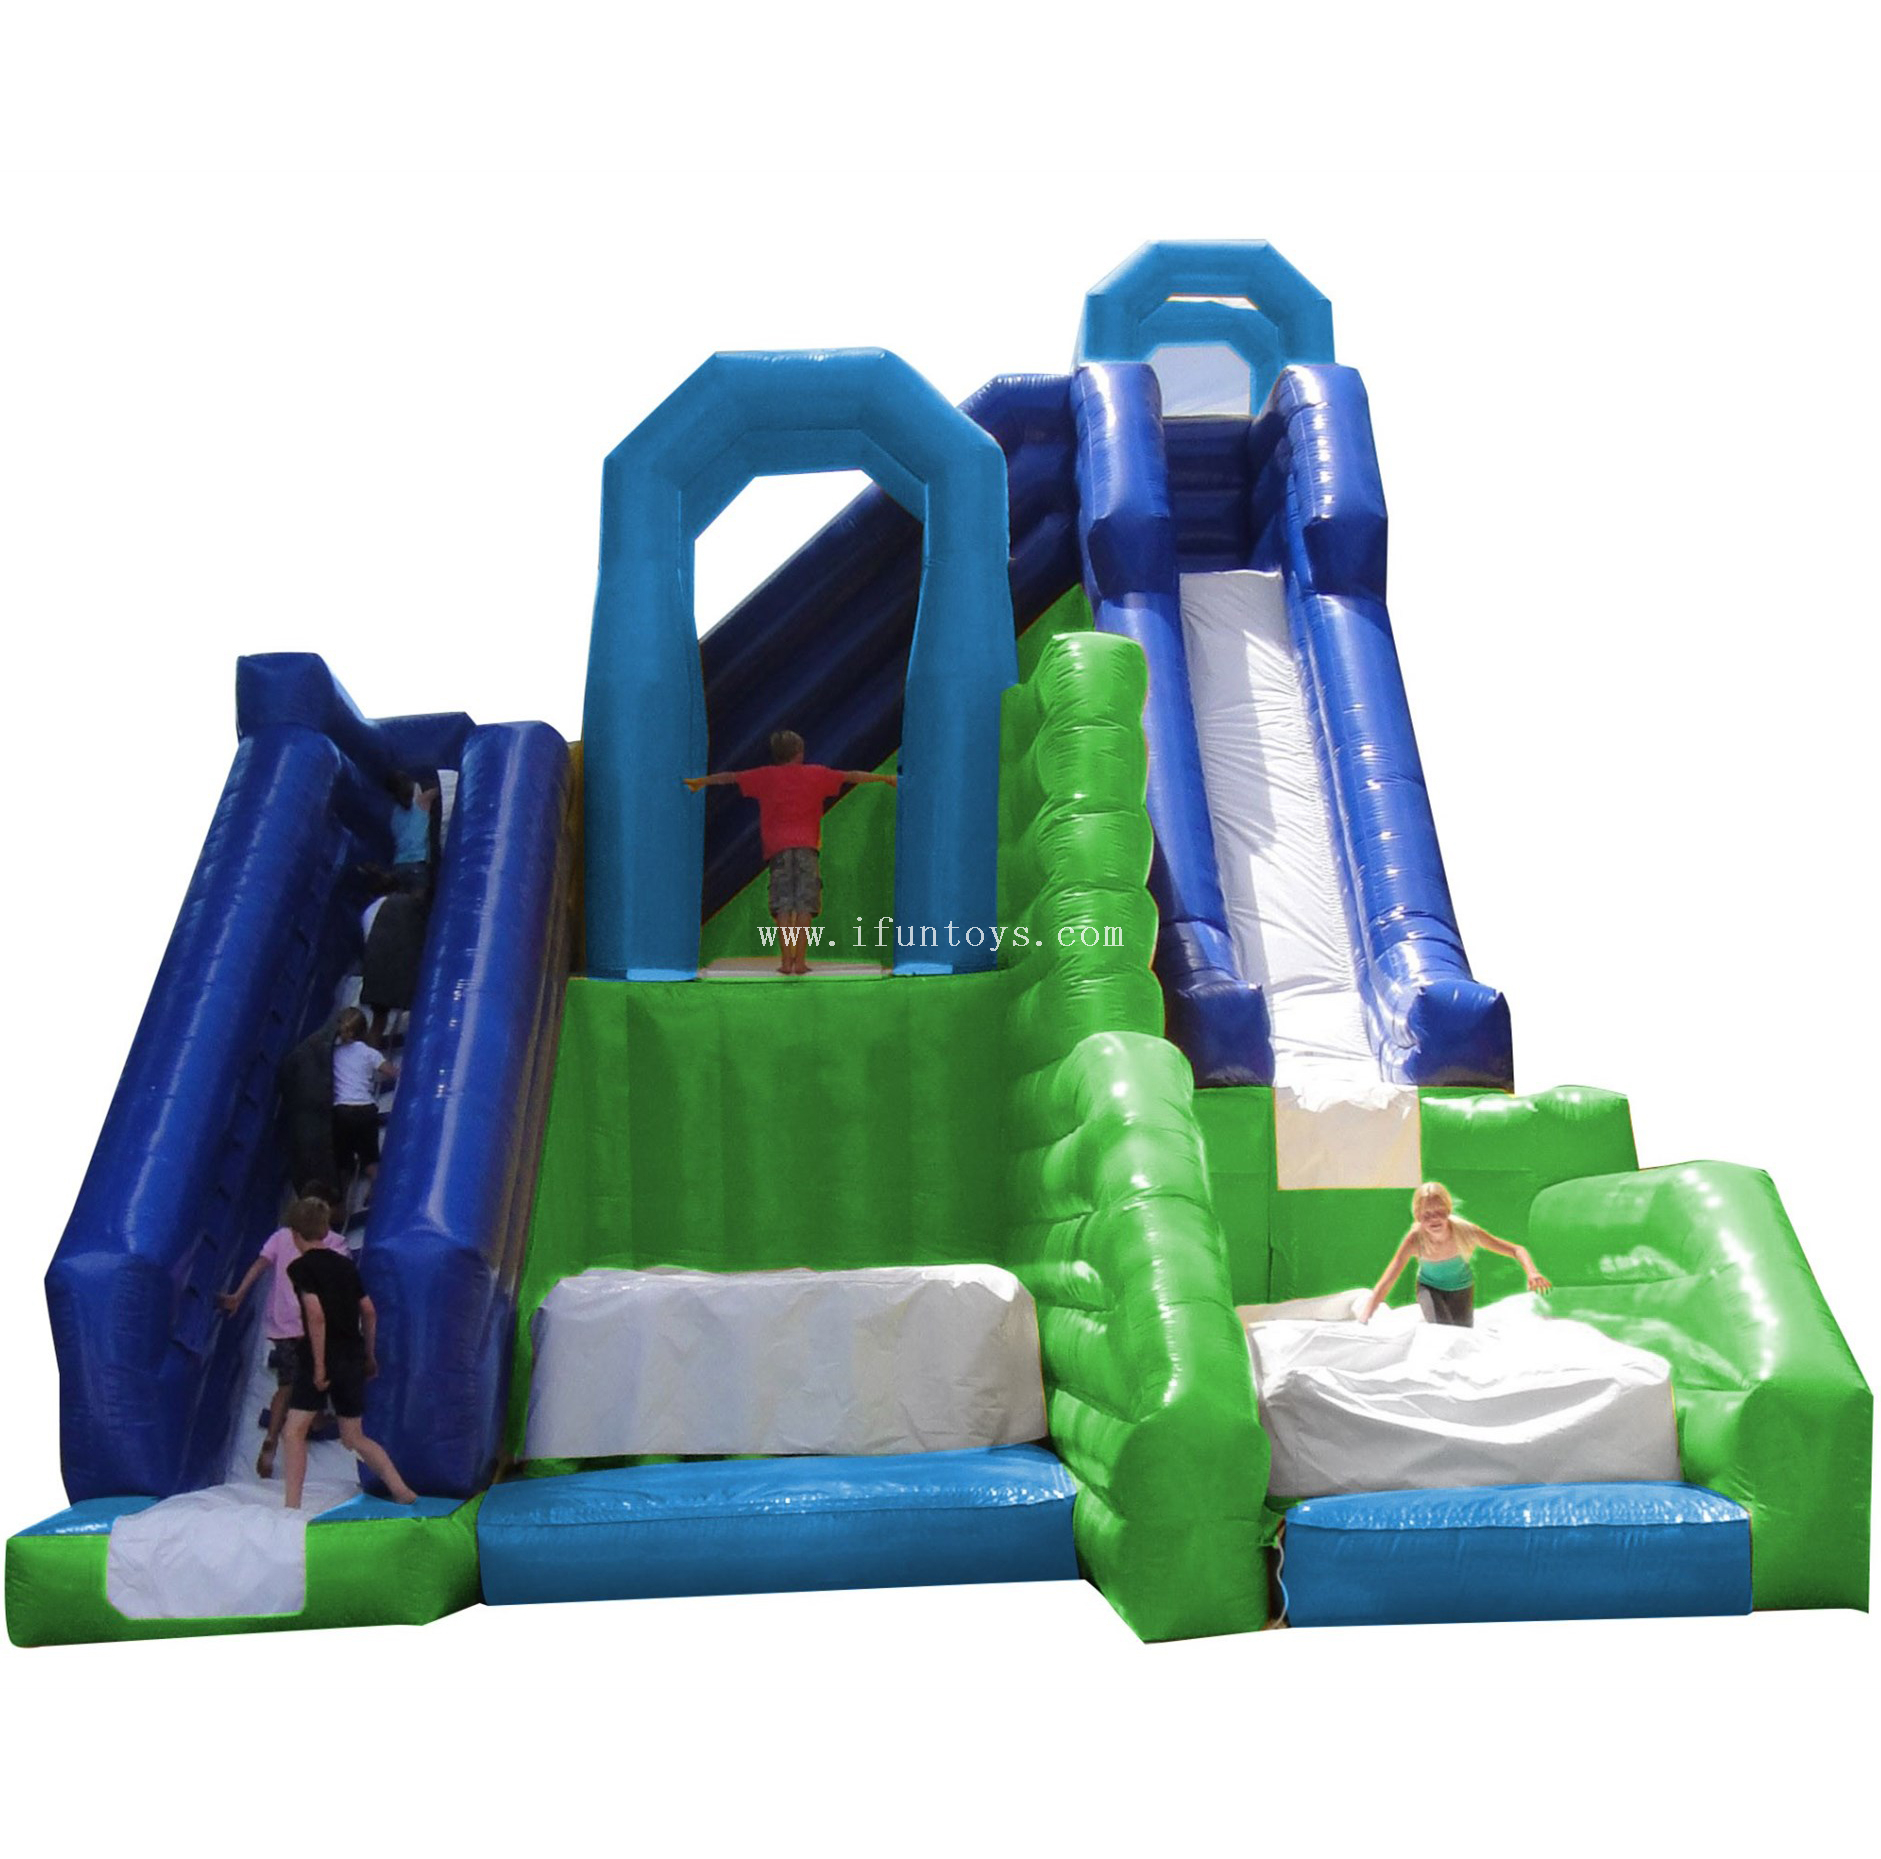 Commerical outdoor inflatable cliff jump slide/ inflatable dry slide/inflatable jump off with bag for kids and adults